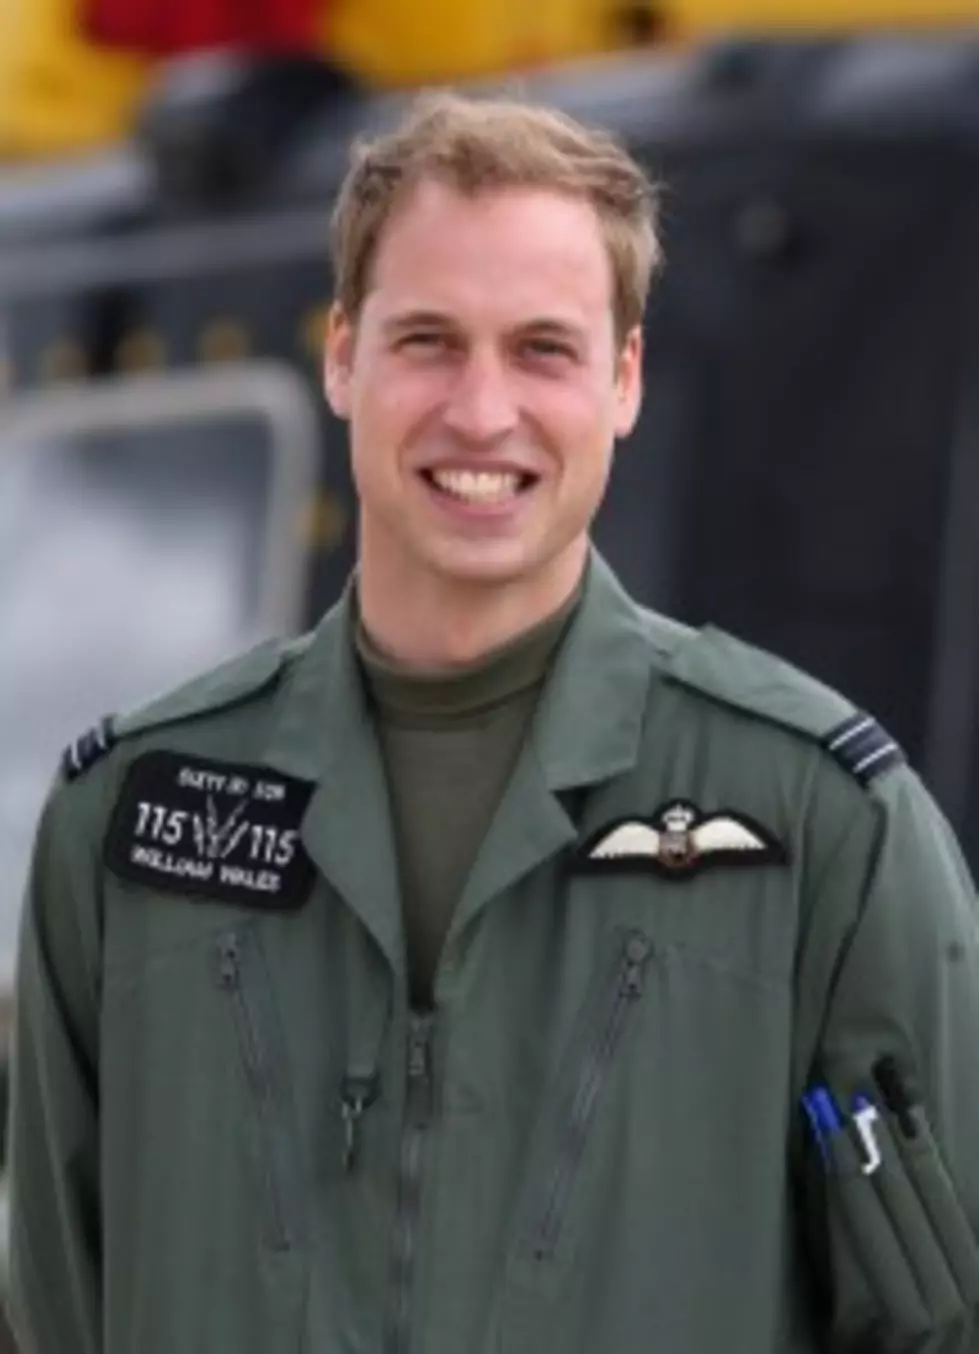 Prince William Saves the Day and Saves a Drowning Girl